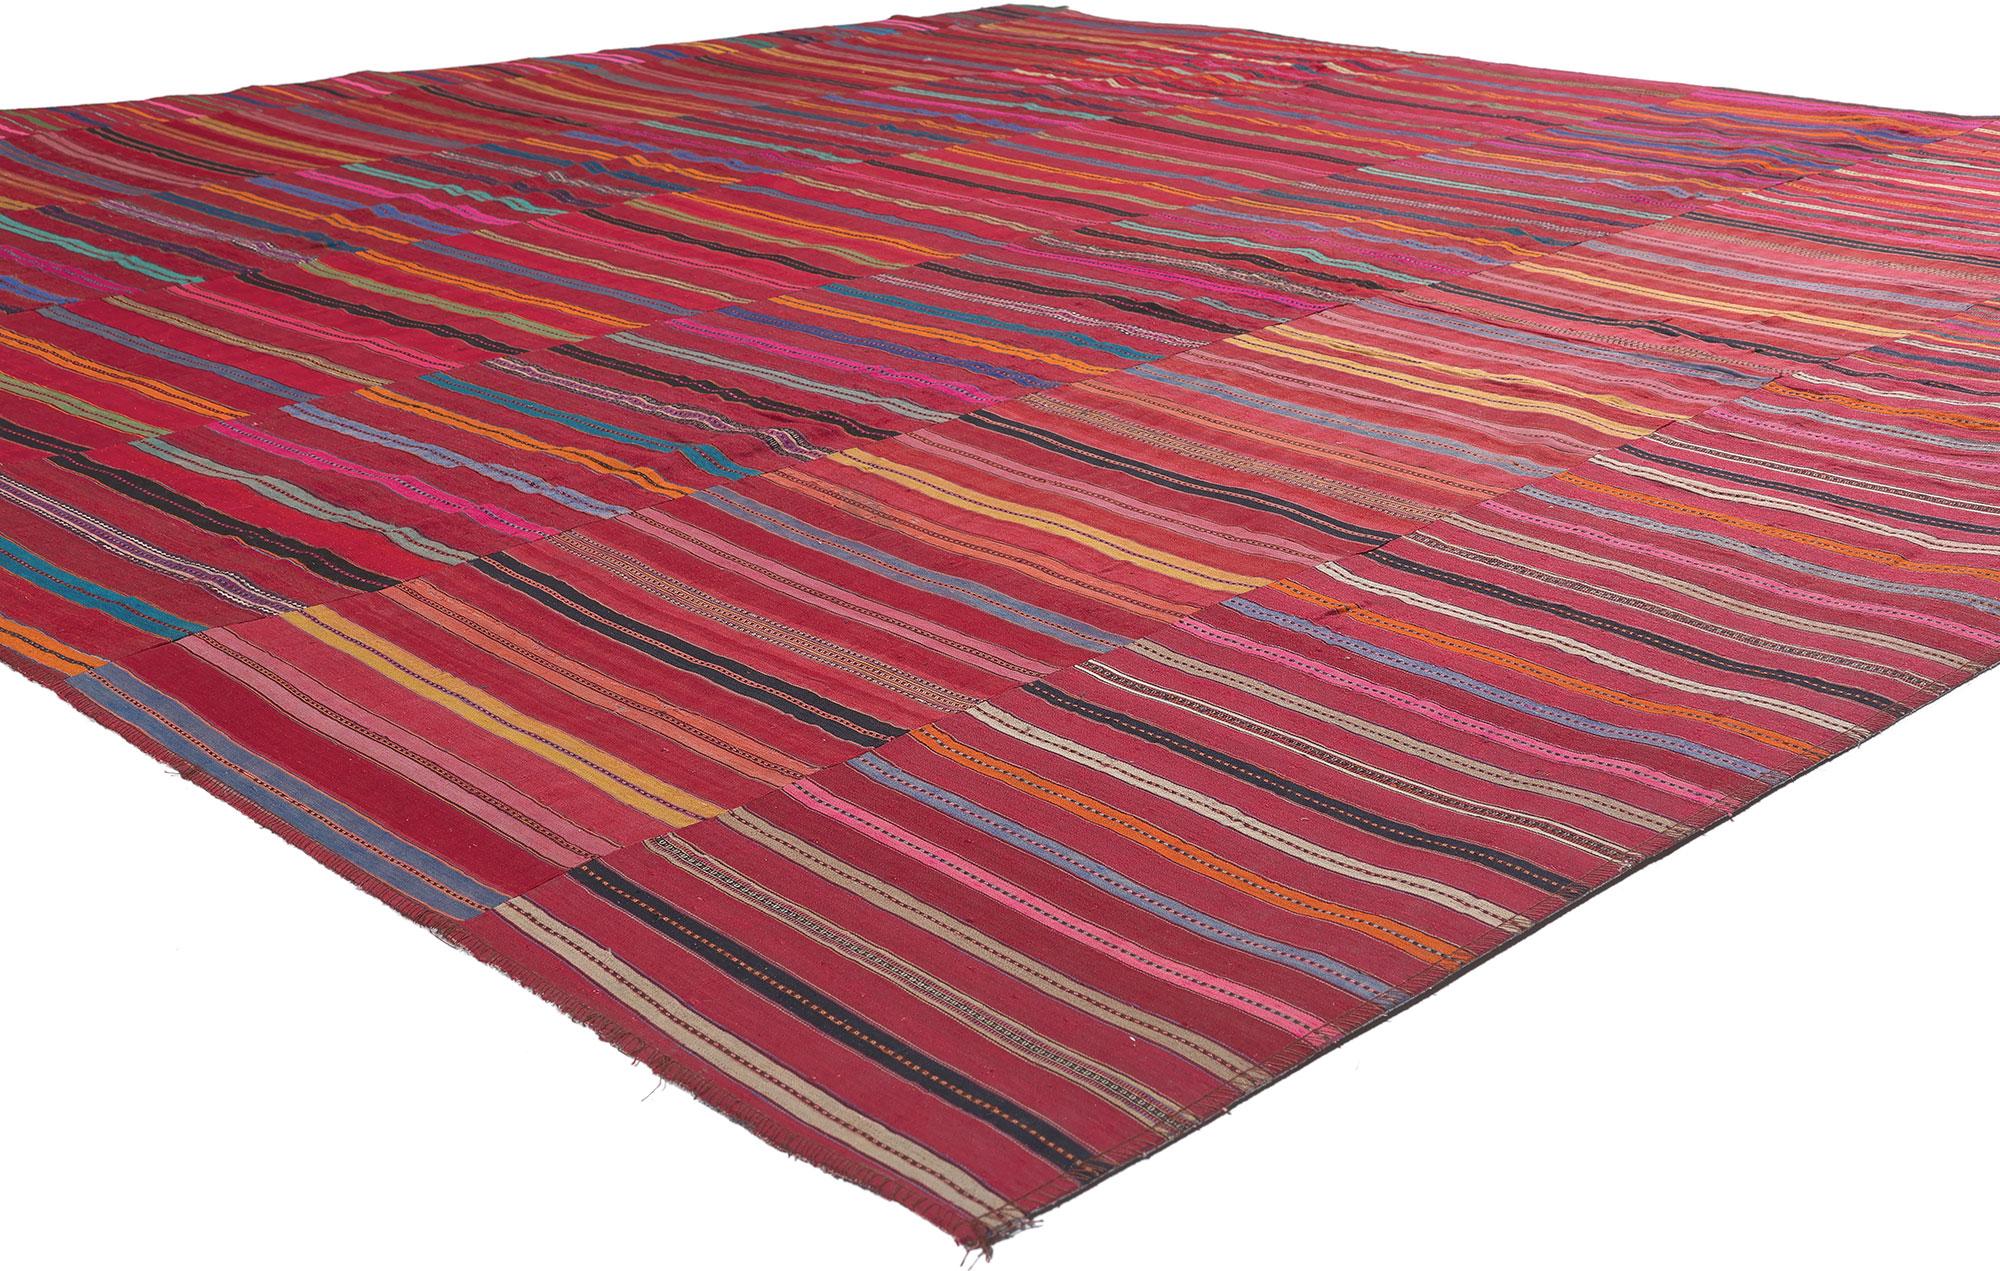 60651 Vintage Turkish Striped Kilim Rug, 09'05 x 09'07.
Rugged beauty collides with weathered charm and rustic sensibility in this handwoven wool vintage Turkish kilim rug. The allover striped panel design and lively colors woven into this piece